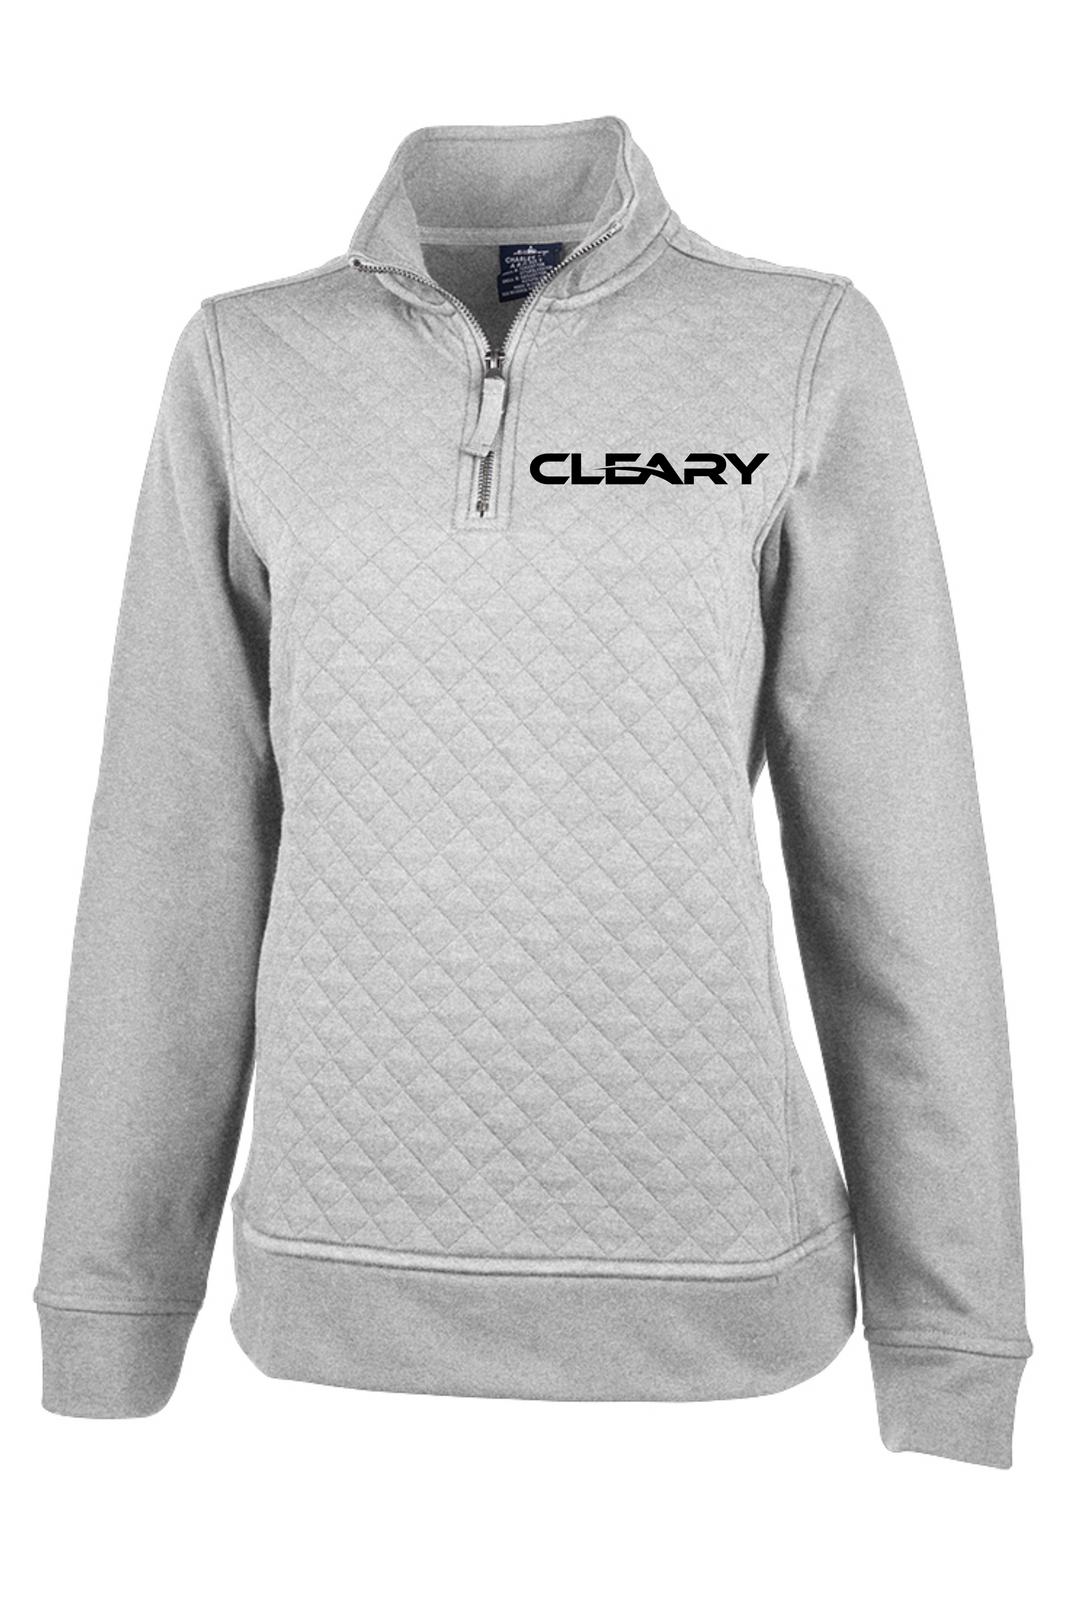 Cleary's Women's Franconia Quilted Pullover Heather Grey